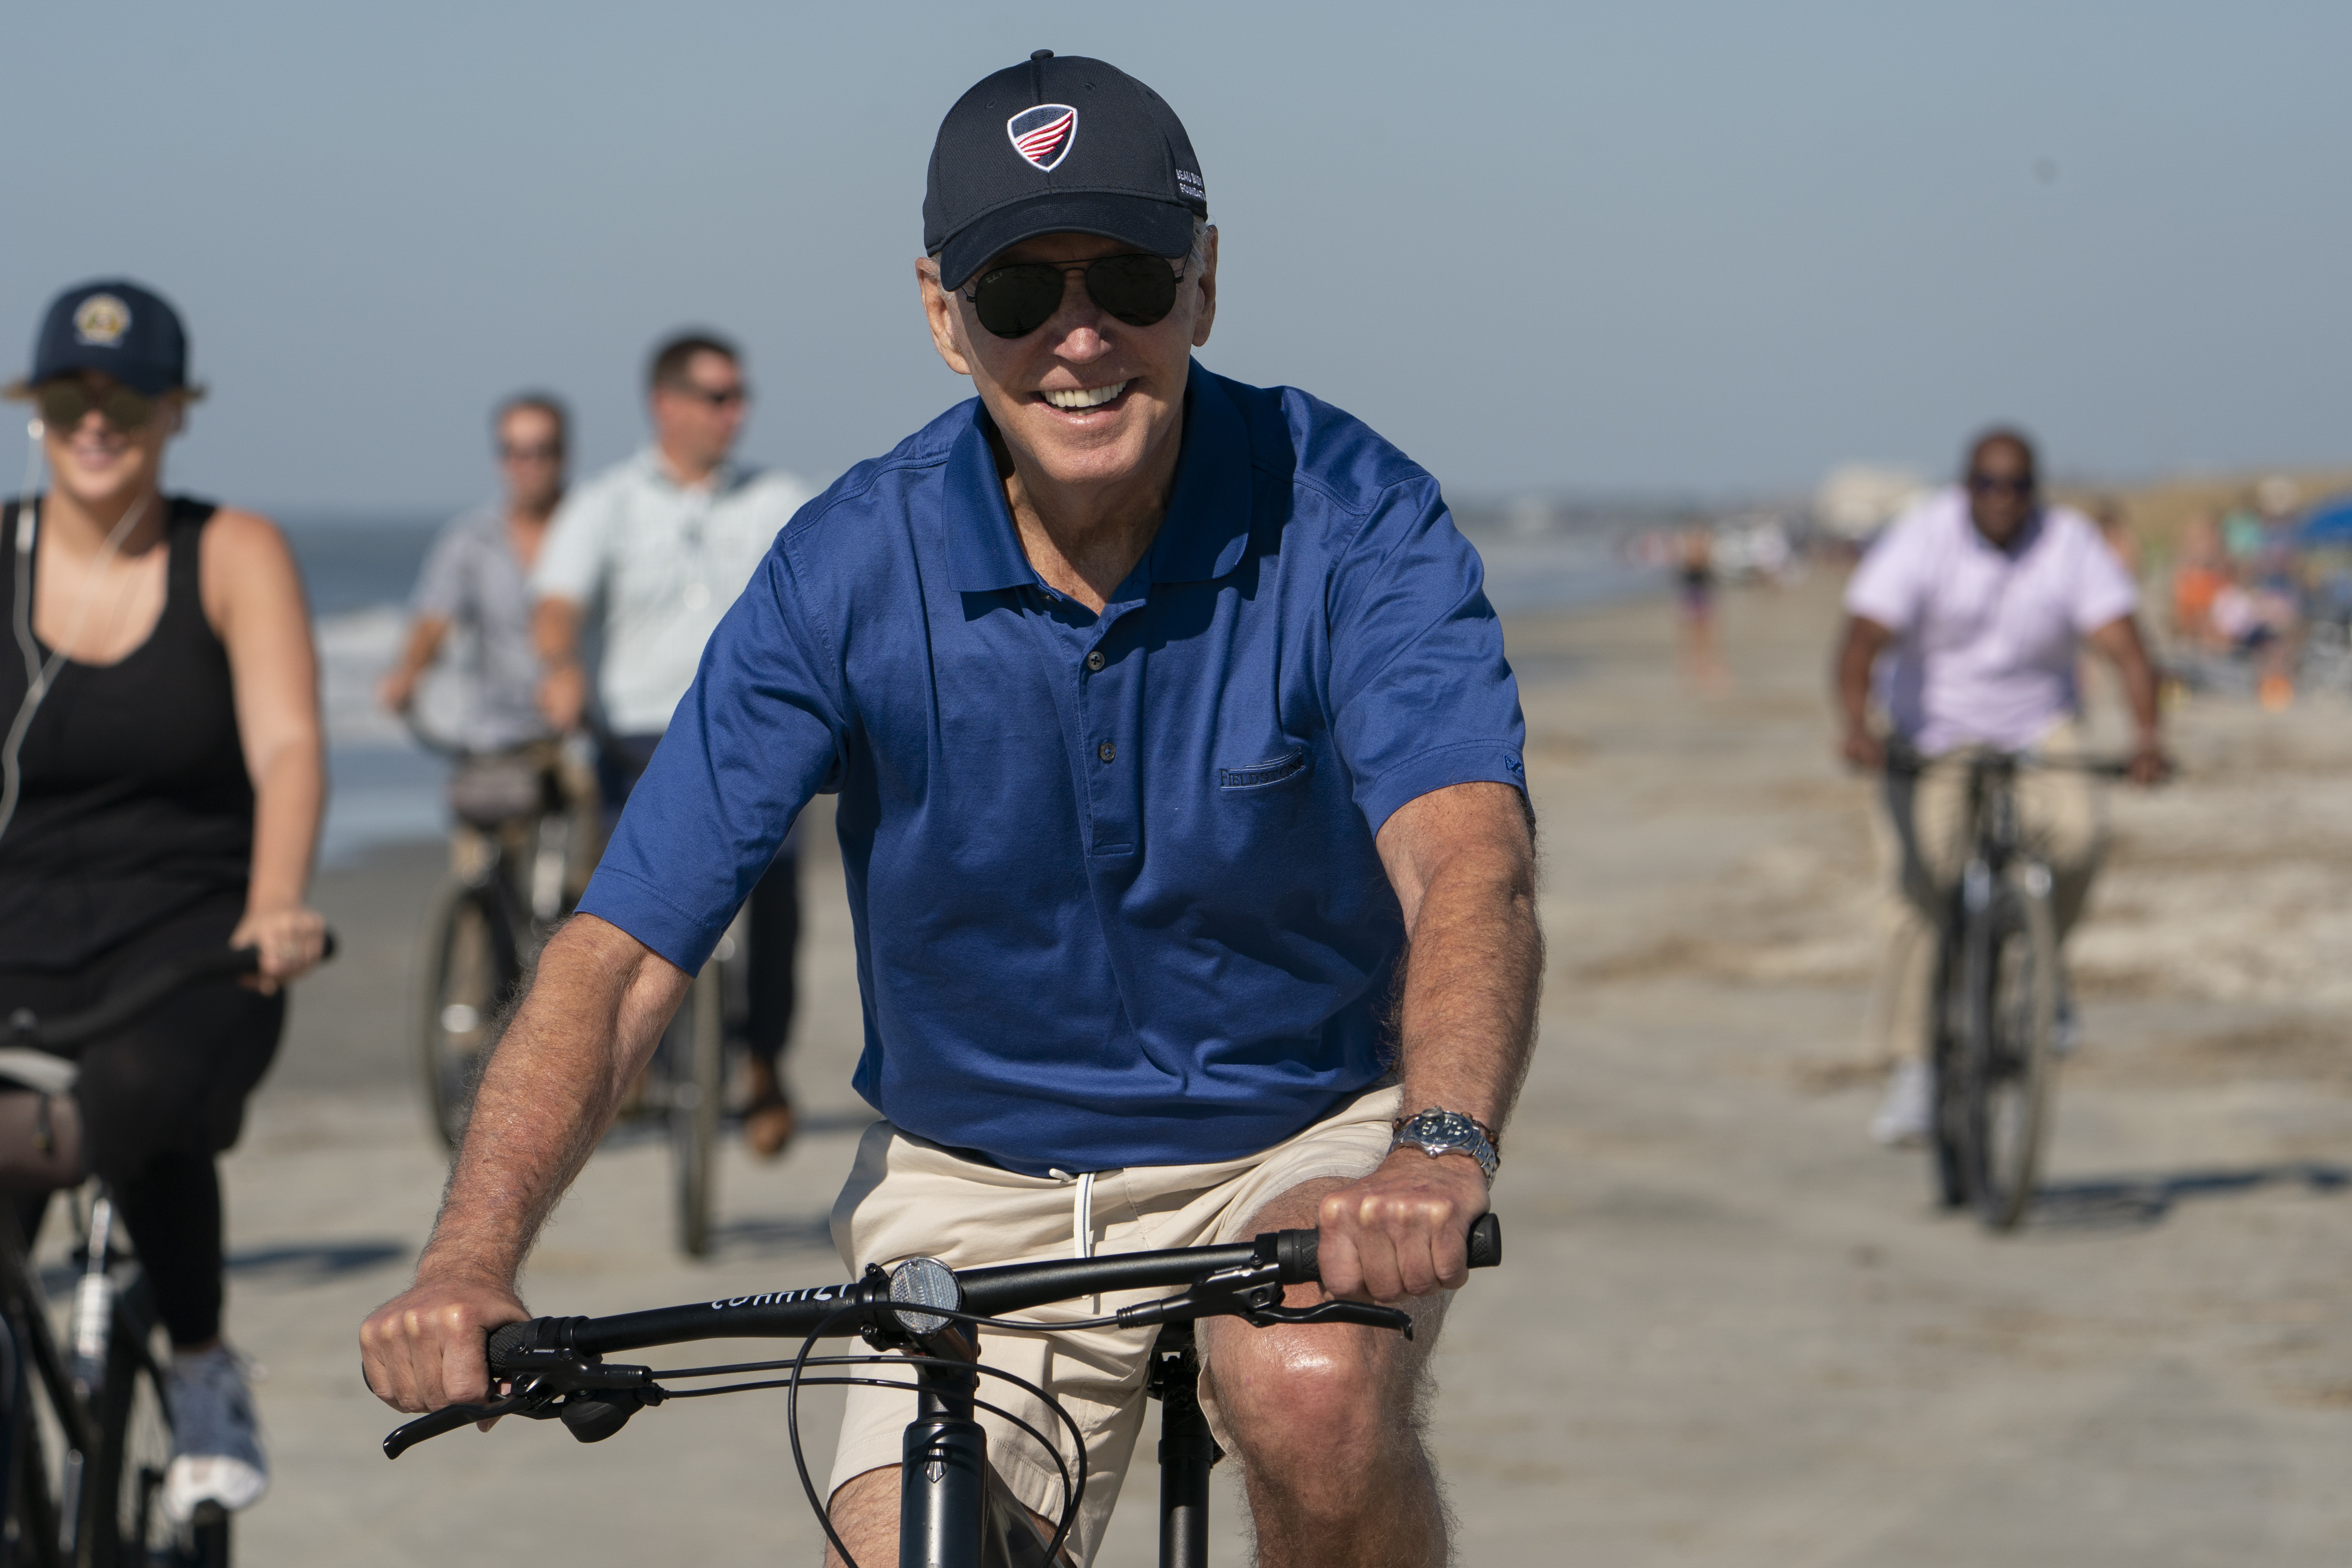 Biden Falls Off Bike During Visit to Rehoboth Beach - The New York Times